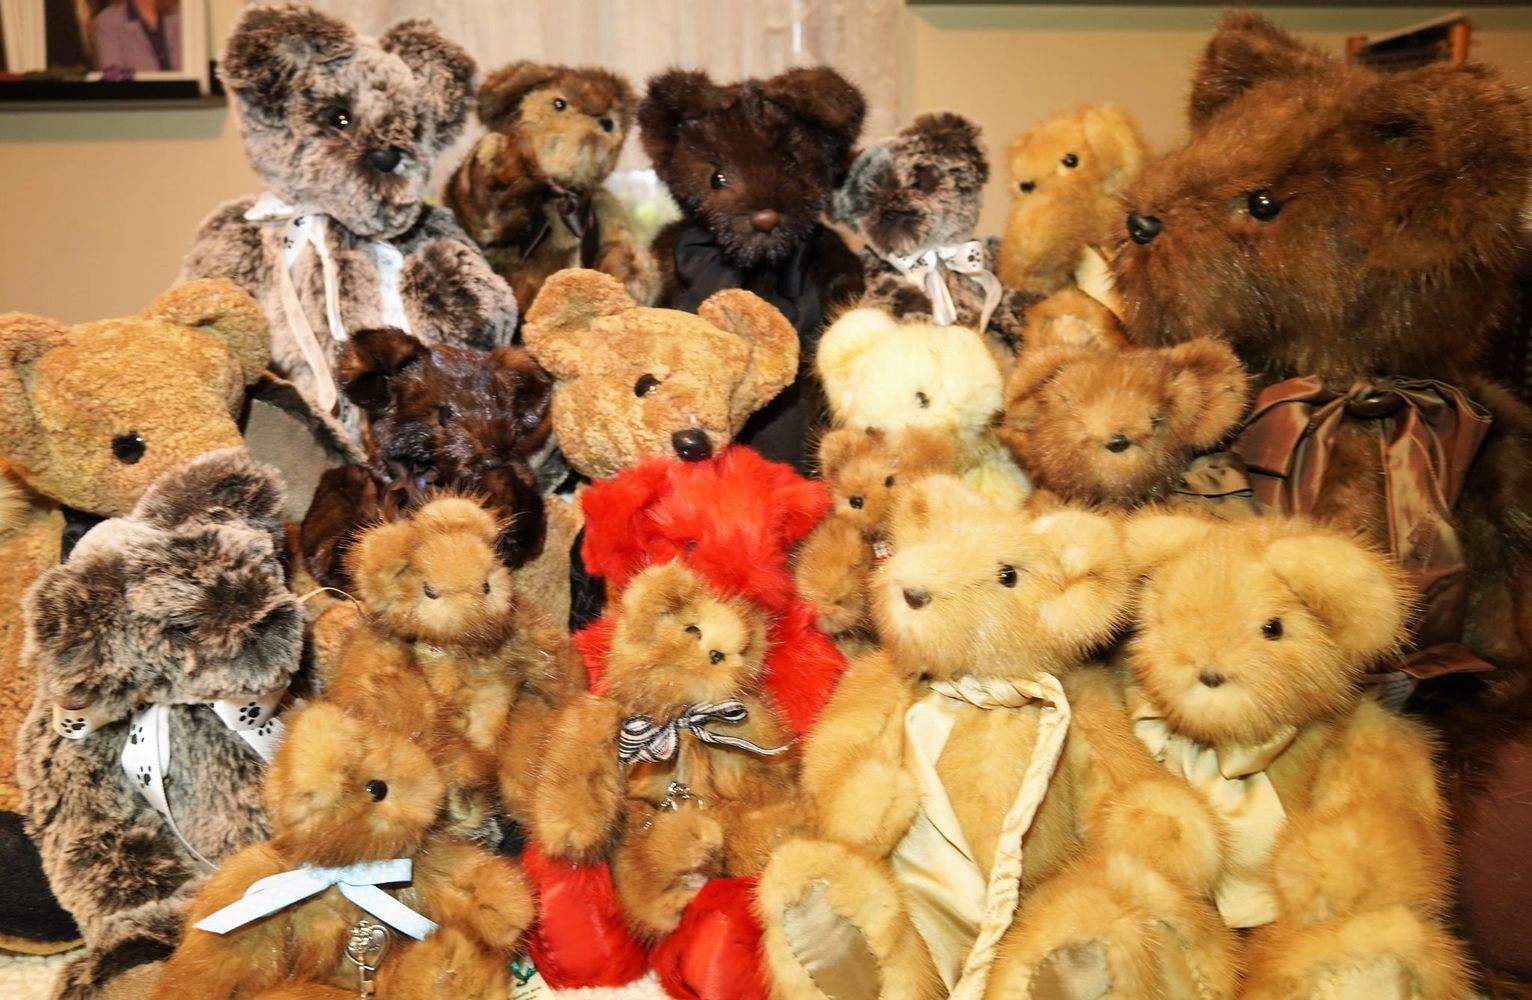 
Specializing in Teddy Bears created from recycled fur coats
and other keepsake clothing